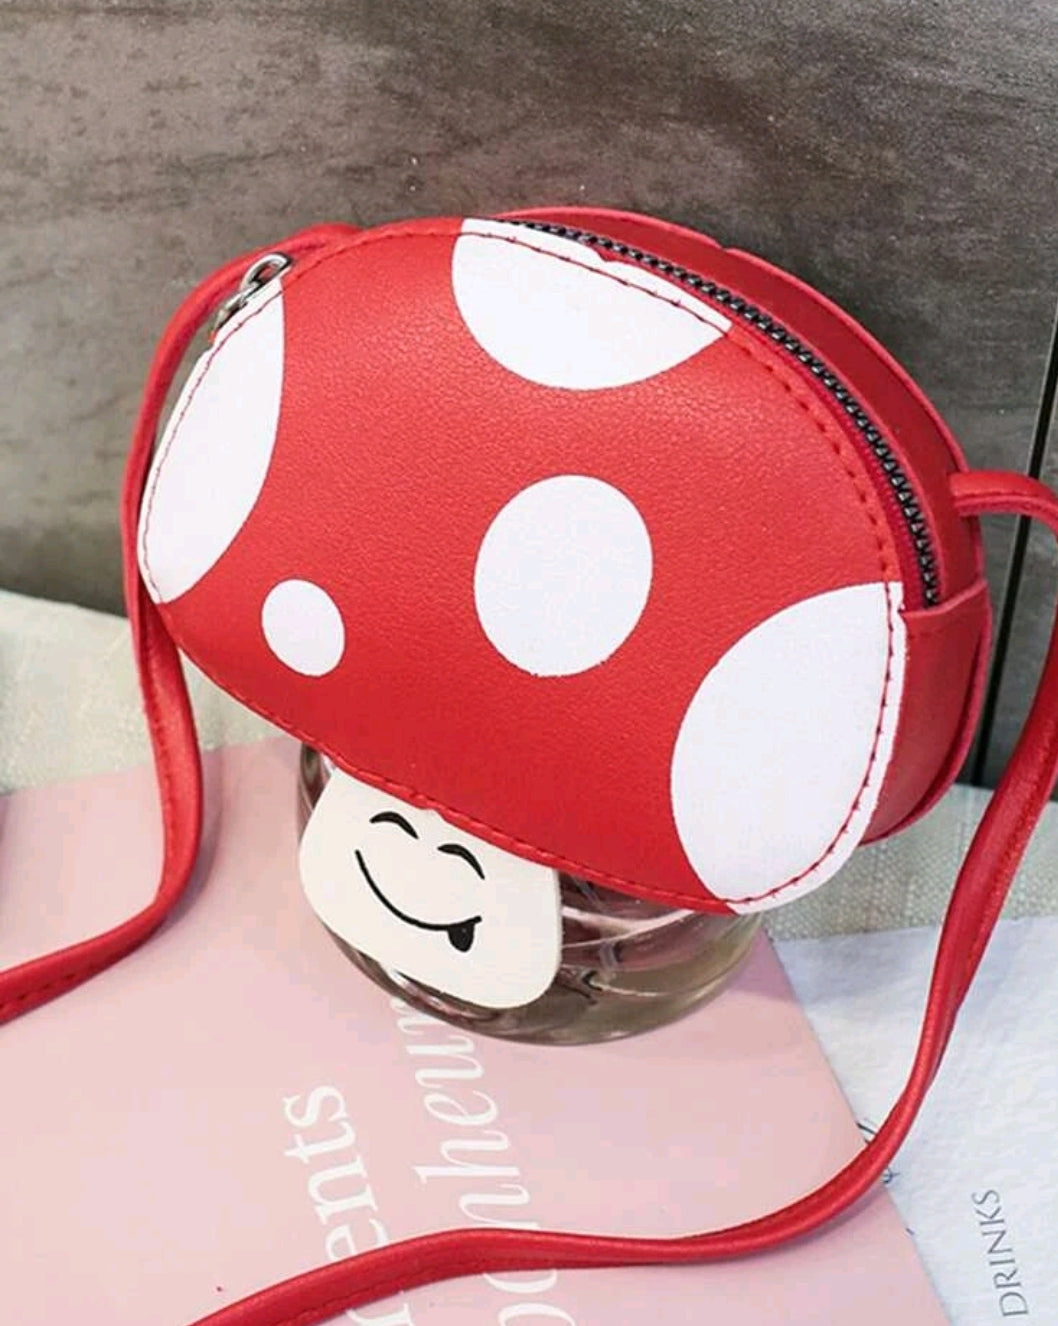 This adorable Mushroom Design Cross-body Bag, red in white spots, is a lovely accessory to use when you go out with friends! Easy to carry, fashionable, easy to wash by hand. How pretty she is!      Pattern Type: Cartoon, Polka Dot     Magnetic: No     Bag Size: Mini     Composition: 100% PU Leather     Material: PU Leather     Size: Length 13cm X Width 4cm X Height 9cm X Strap Length 80cm